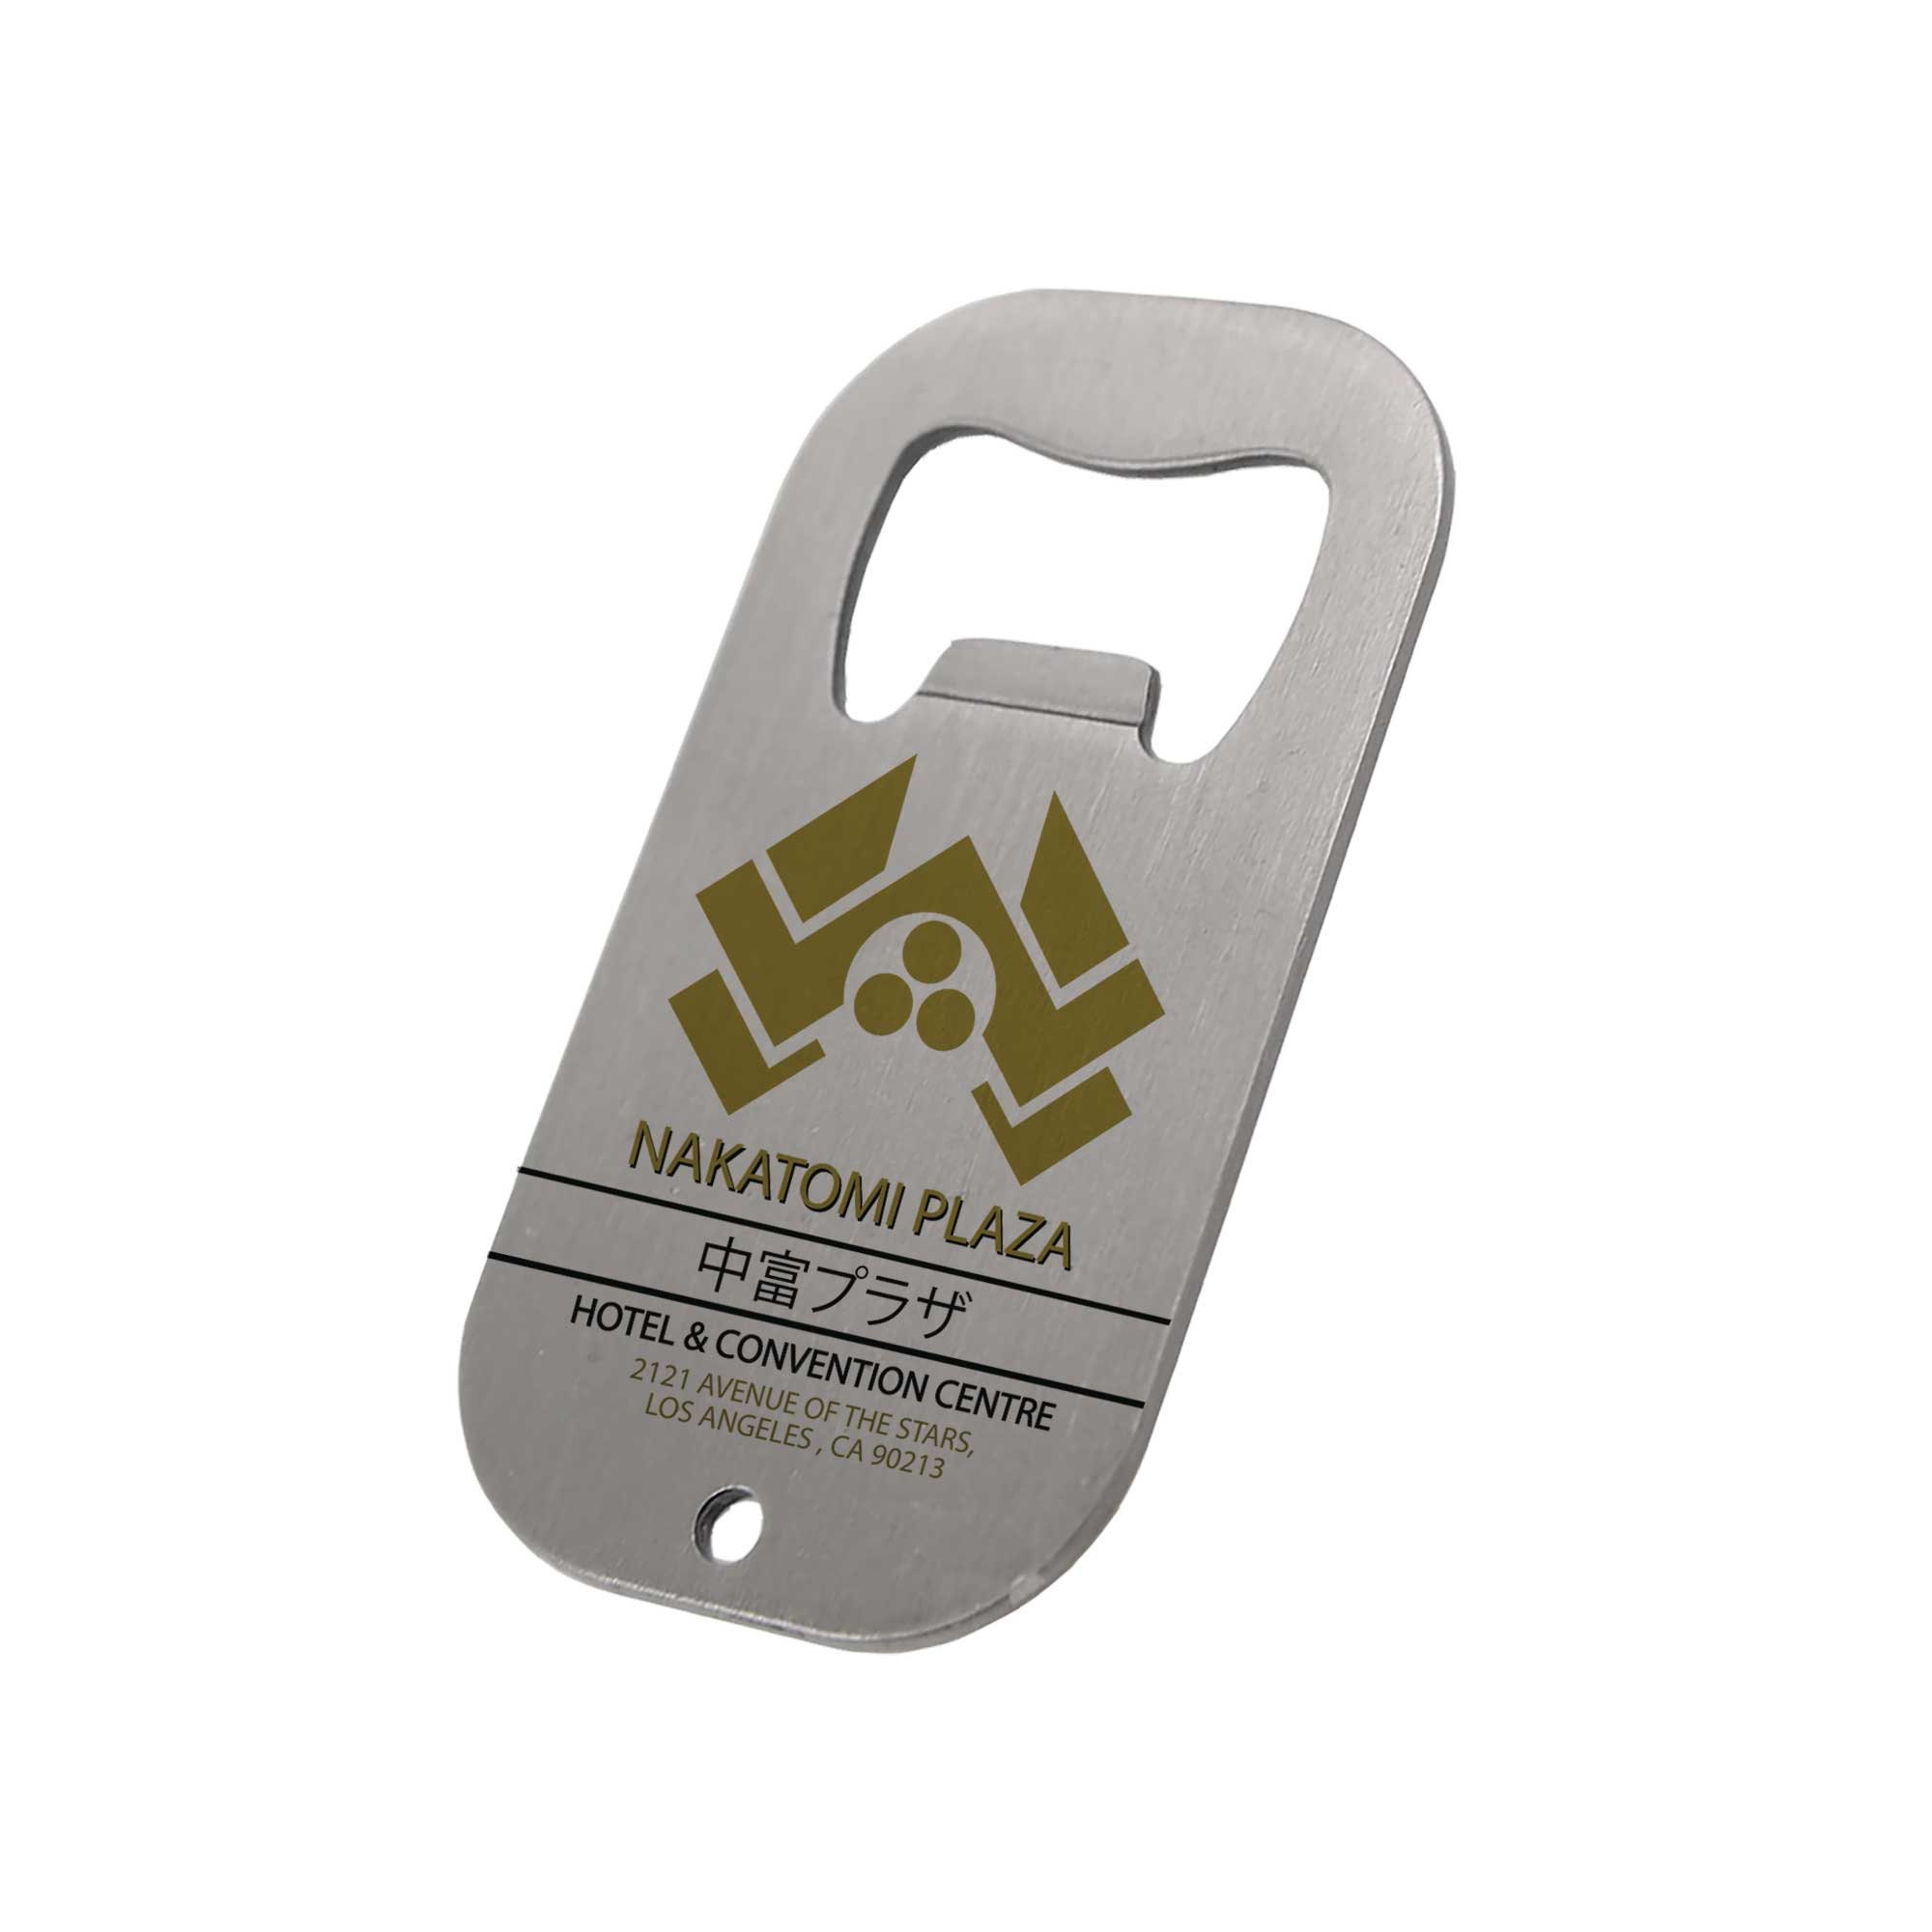 Sublimation Bottle Opener Stainless Steel 2 Sided- Los Angeles